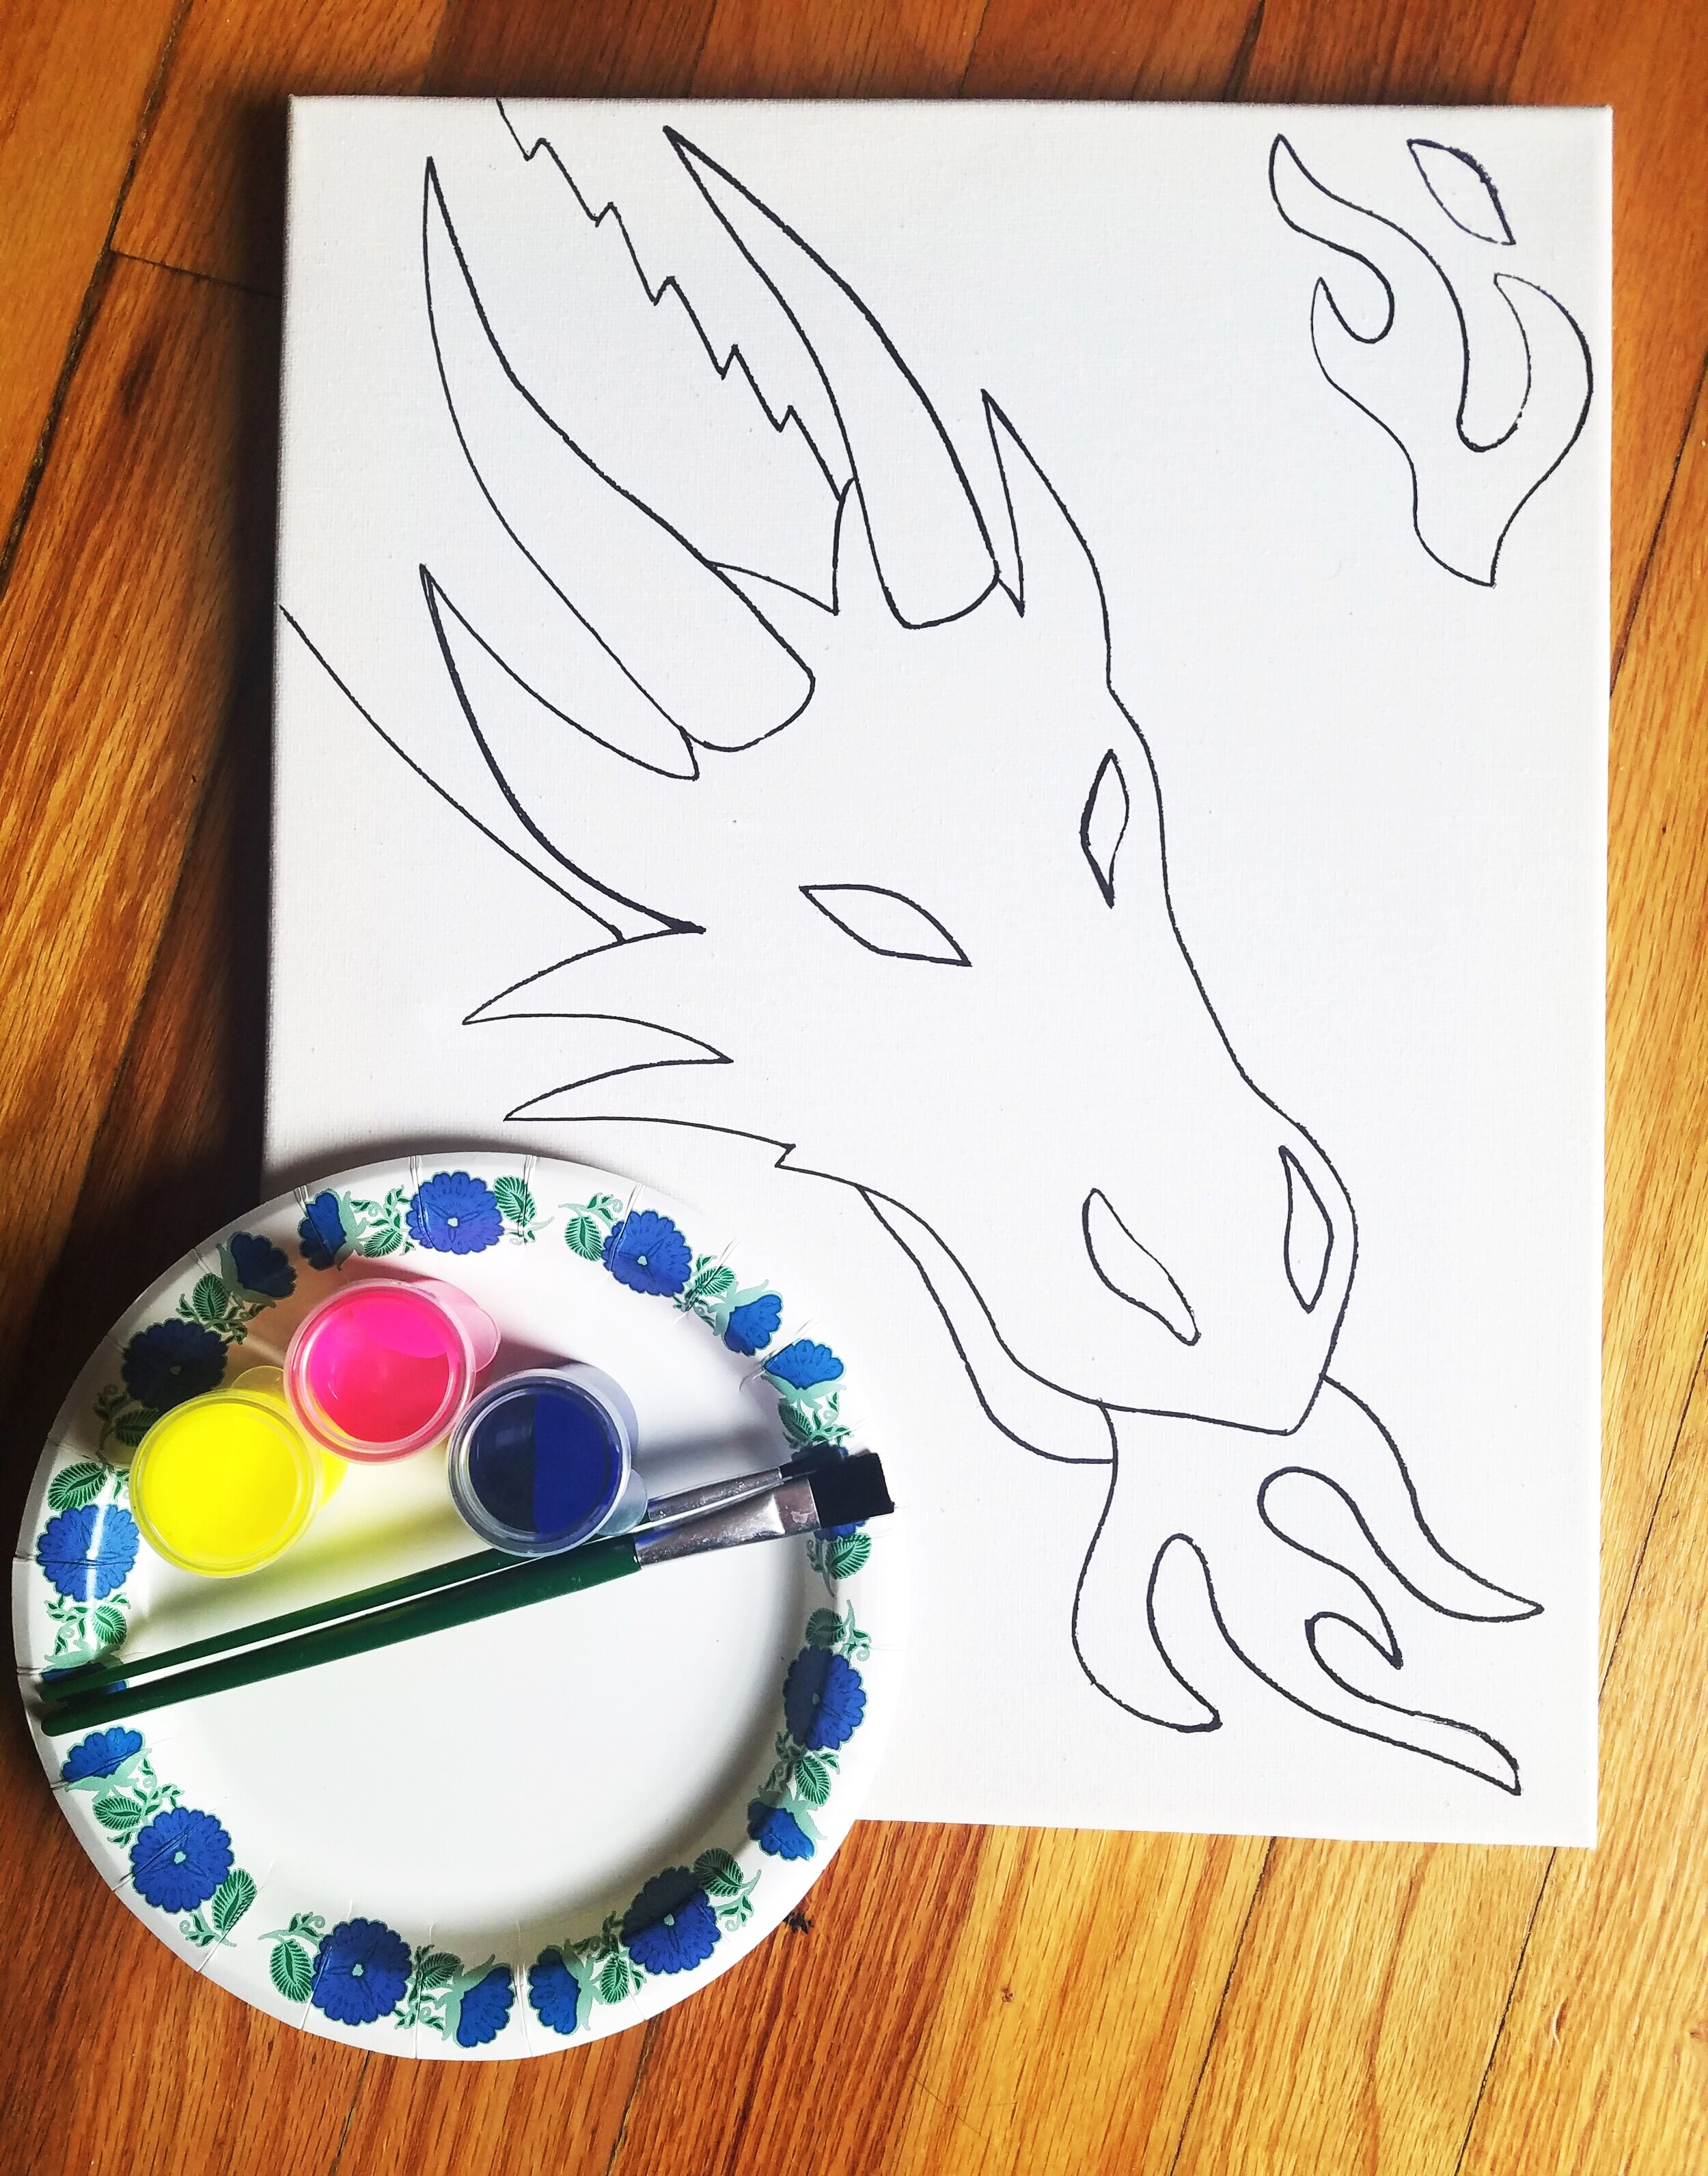 Kids Predrawn Canvas Art, Outlined Sketch, DIY Paint Party Kit, Boy Teen  Kid Birthday, Ready to Paint Your Own Fire-breathing Dragon Drawing 